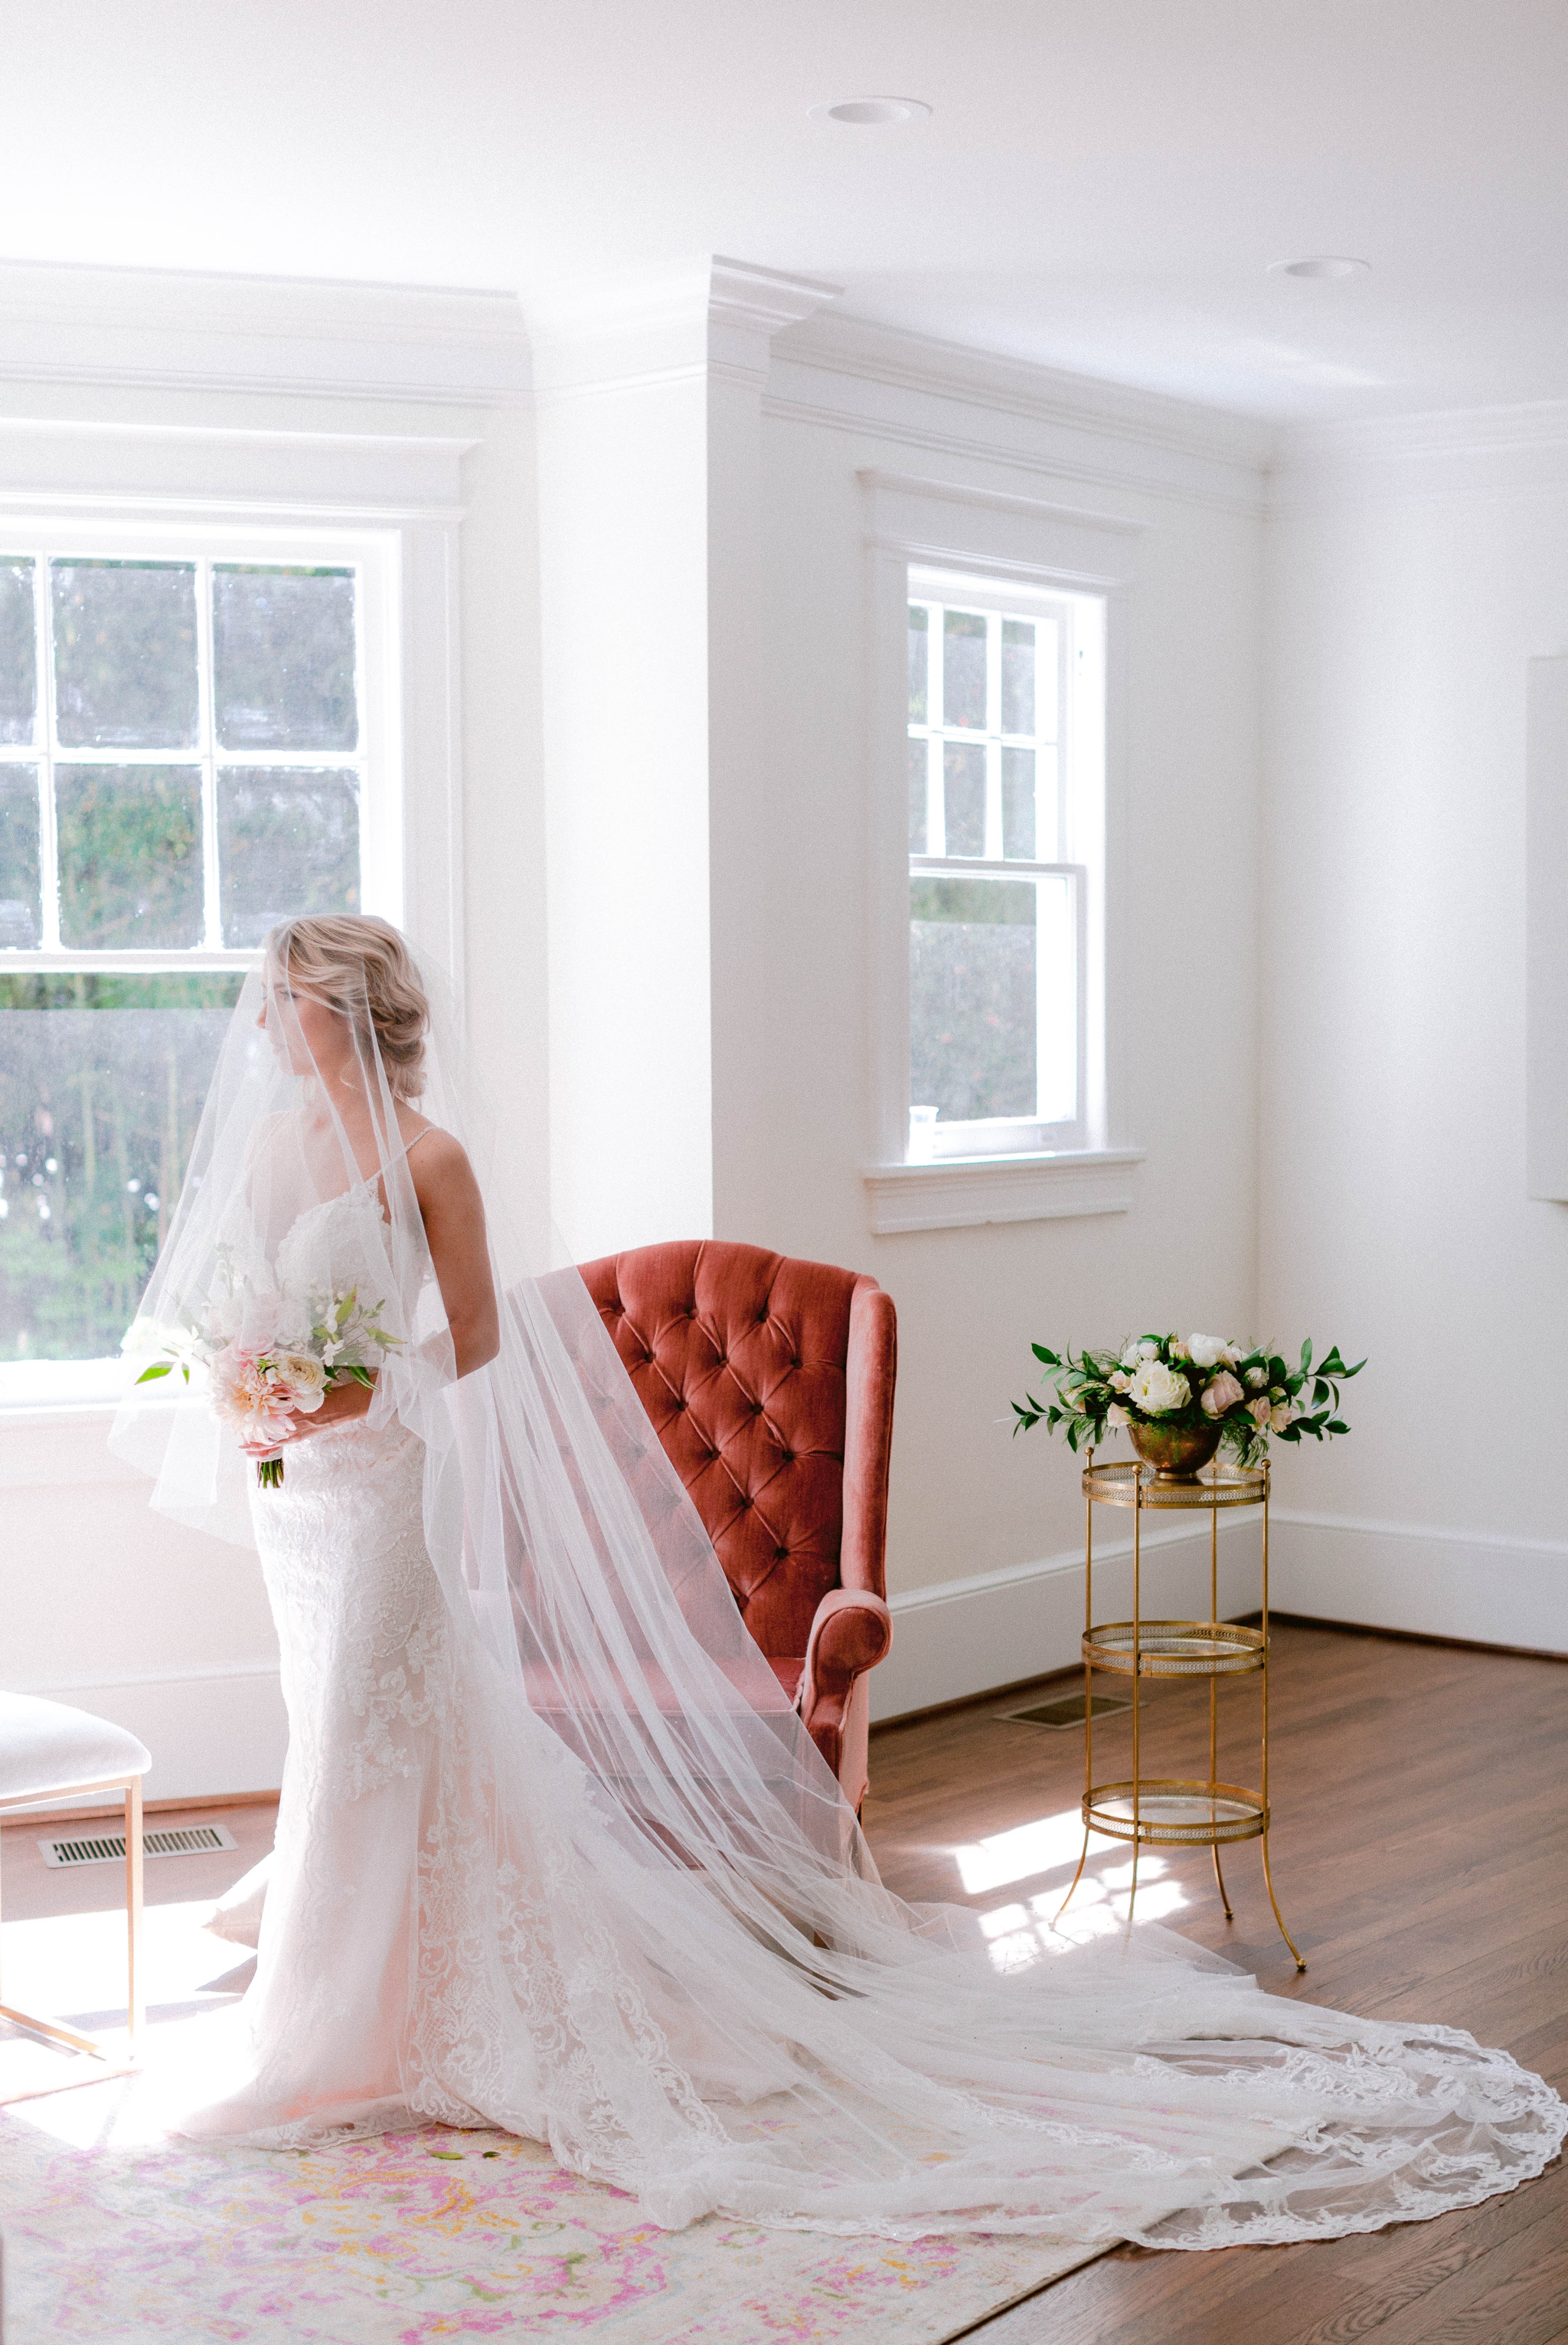  Indoor Natural Light Bridal Portraits by a window with a white backdrop - classic bride with soft drop veil over her face - wedding gown by Stella York - Honolulu, Oahu, Hawaii Wedding Photographer 